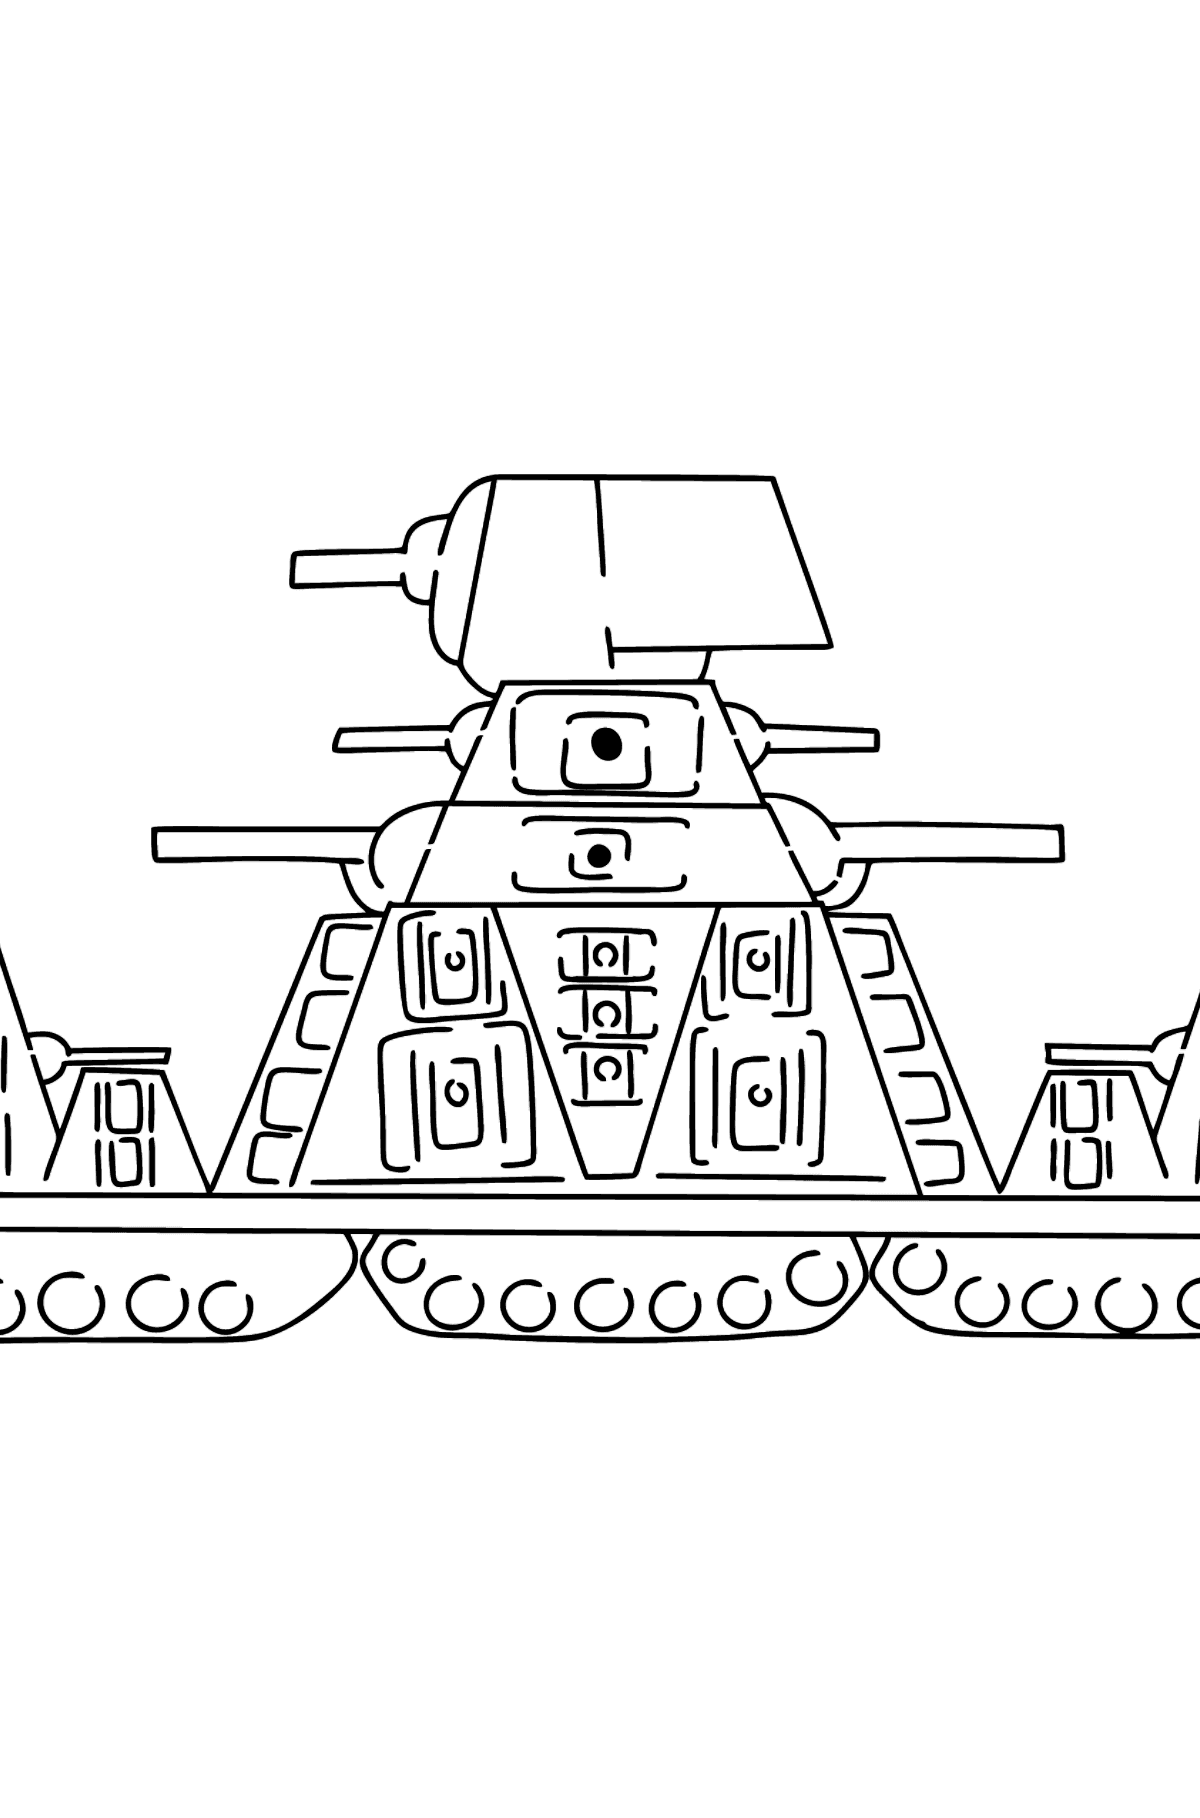 Tank KV 44 coloring page - Coloring Pages for Kids